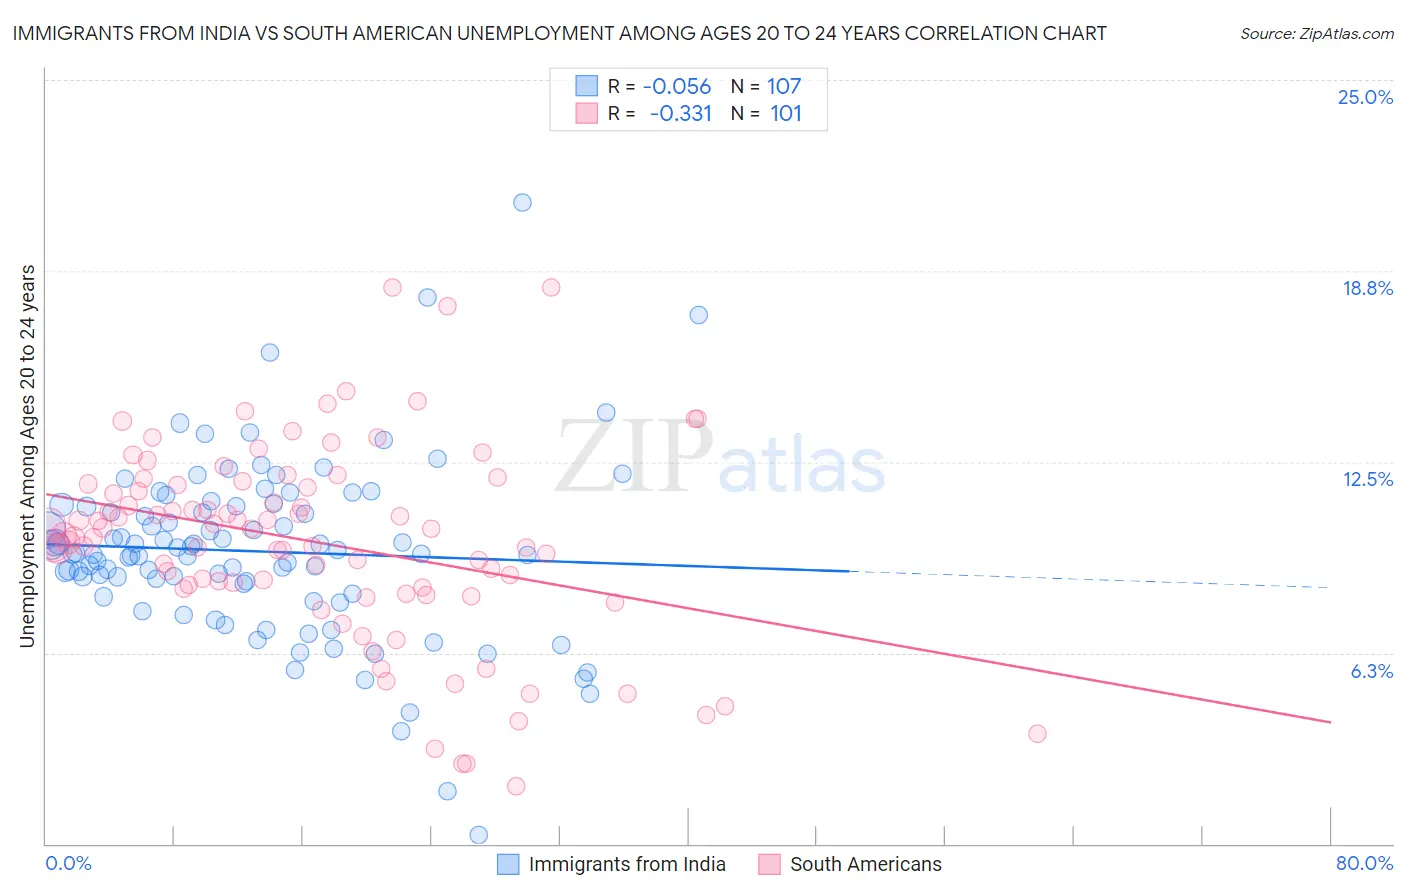 Immigrants from India vs South American Unemployment Among Ages 20 to 24 years